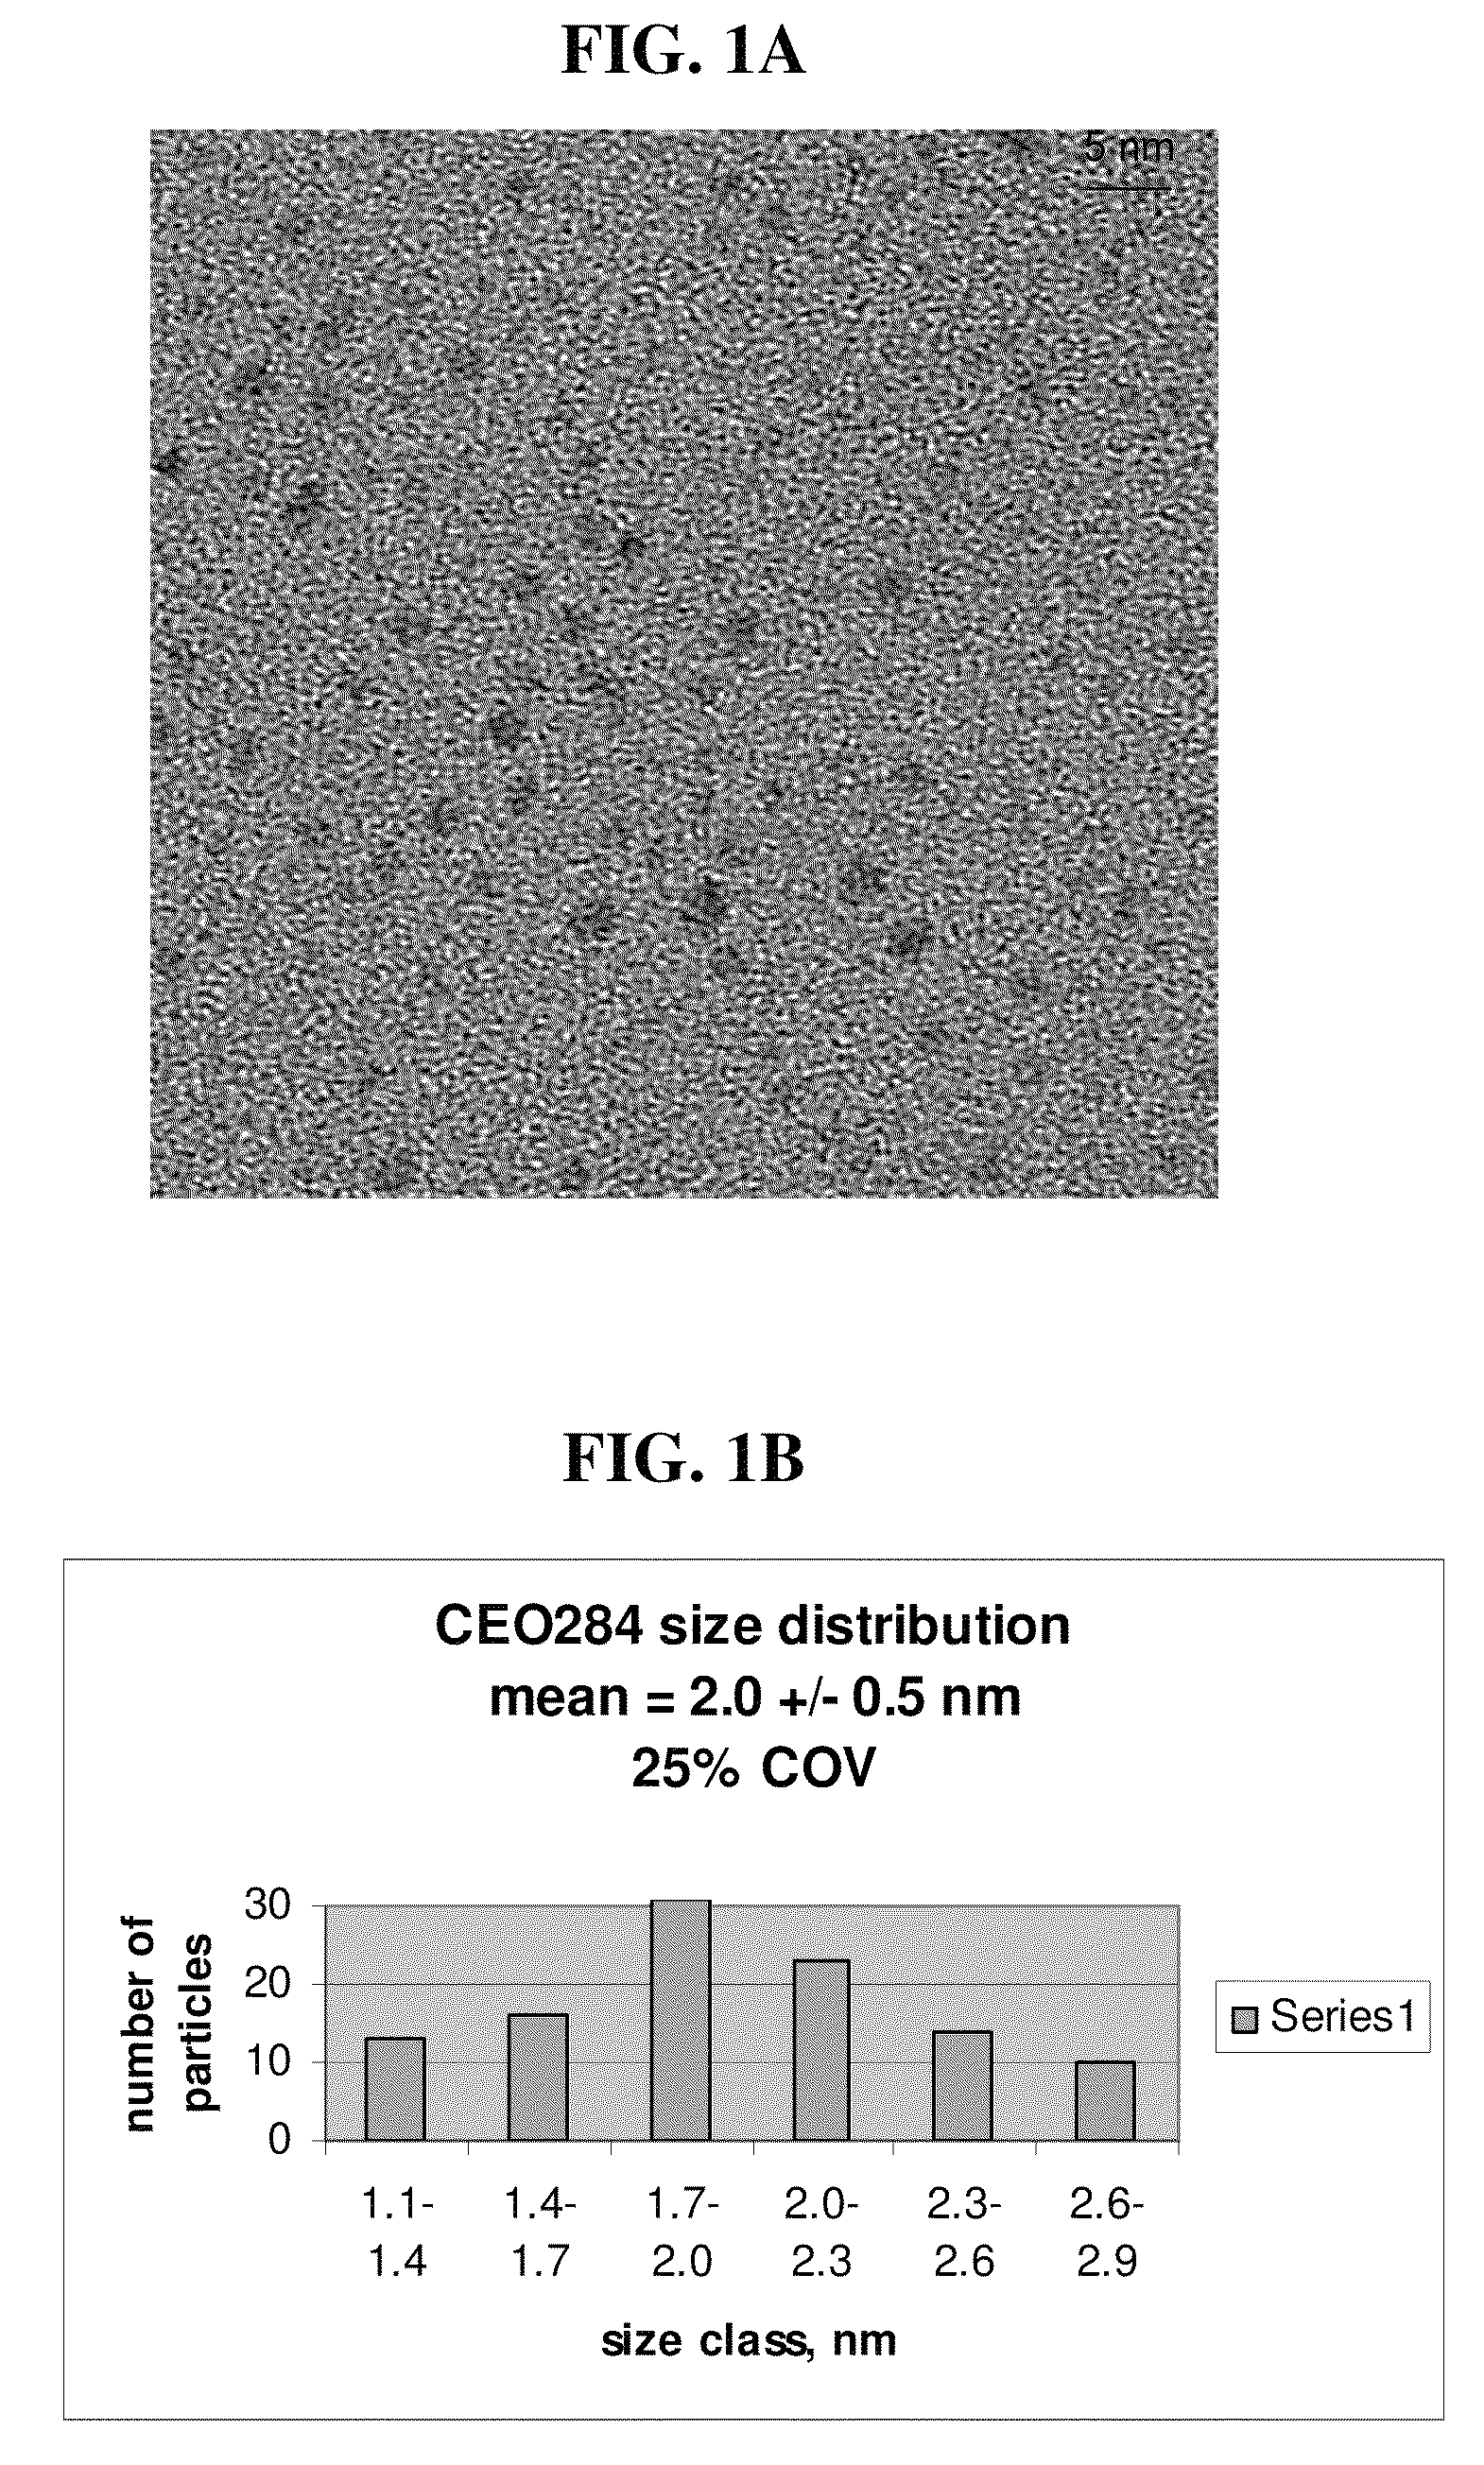 Process for solvent shifting a nanoparticle dispersion